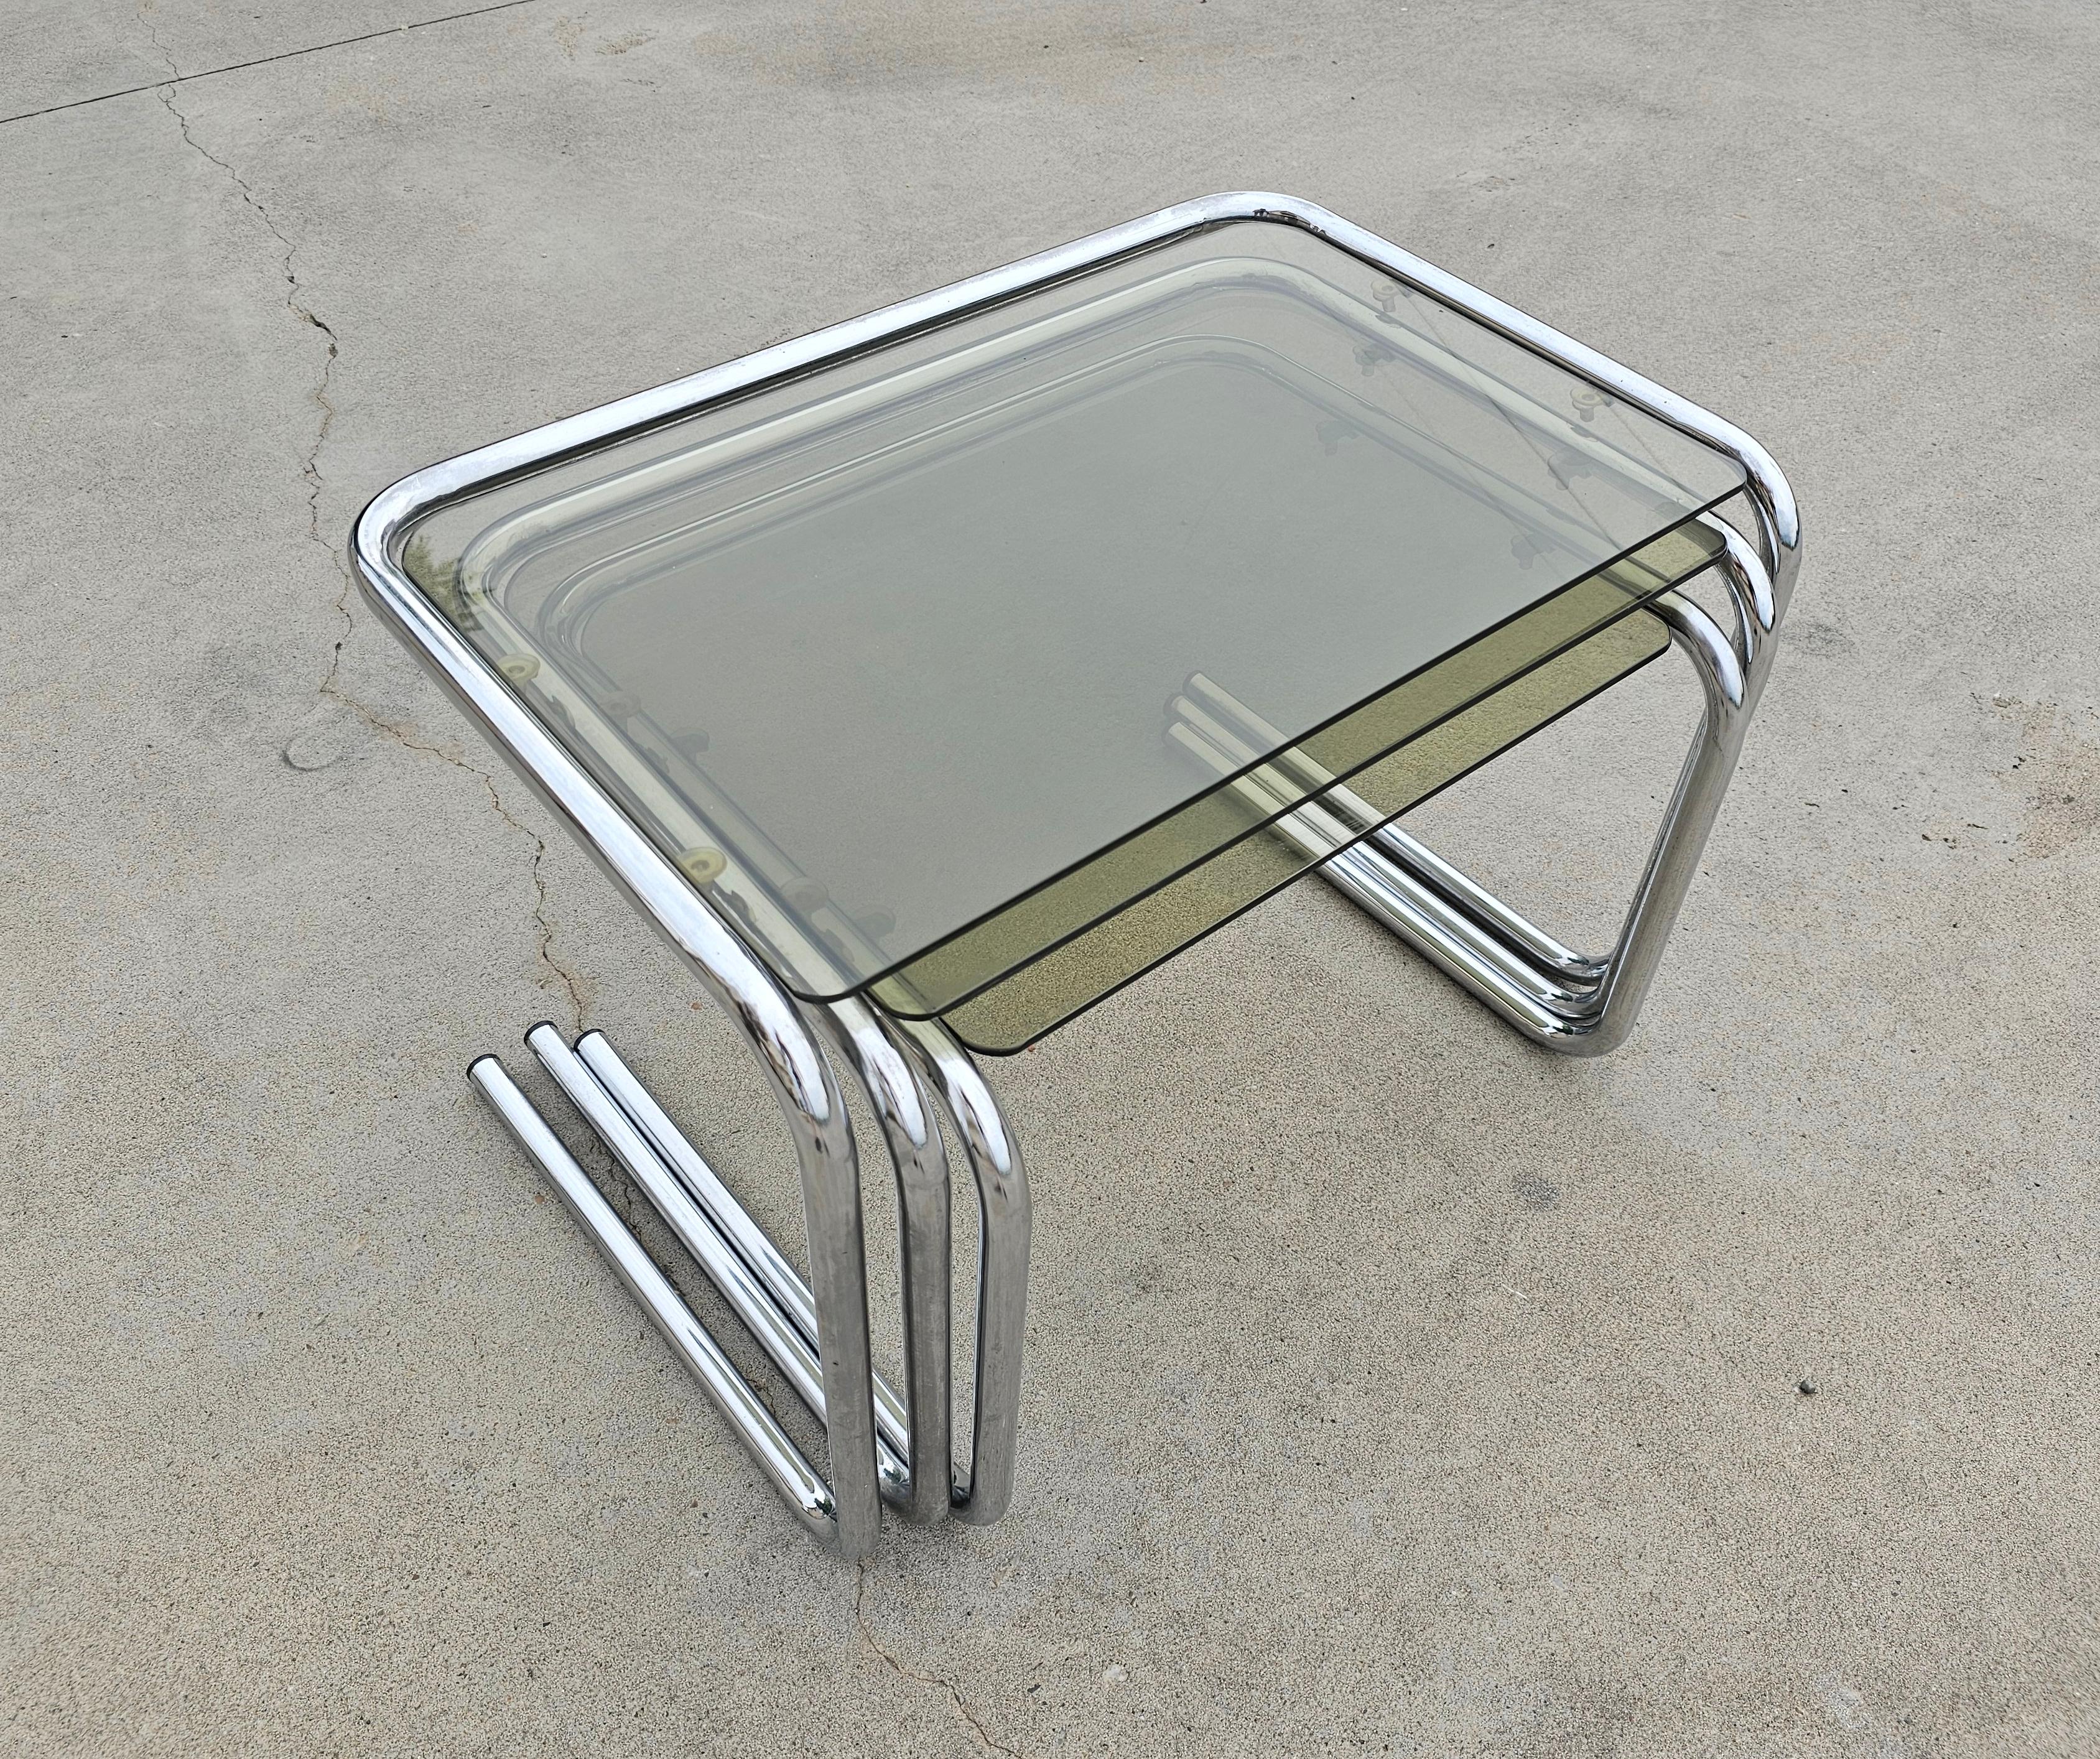 Milo Baughman style Chrome and Smoked Glass Nesting Tables, Italy 1970s For Sale 2